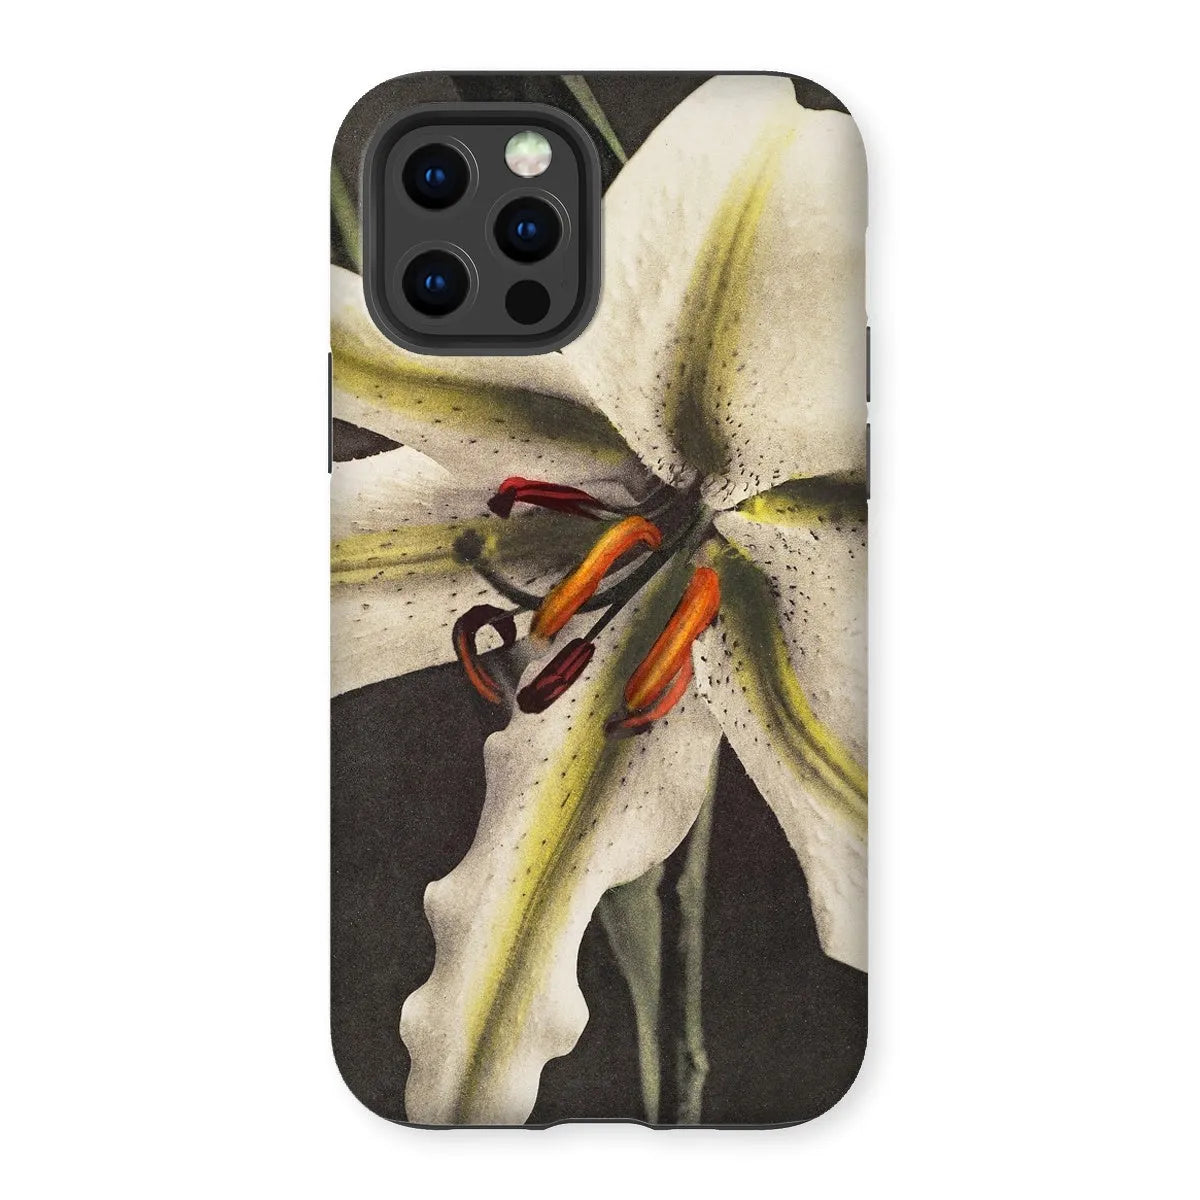 Lily By Kazumasa Ogawa Art Phone Case - Iphone 12 Pro / Matte - Mobile Phone Cases - Aesthetic Art